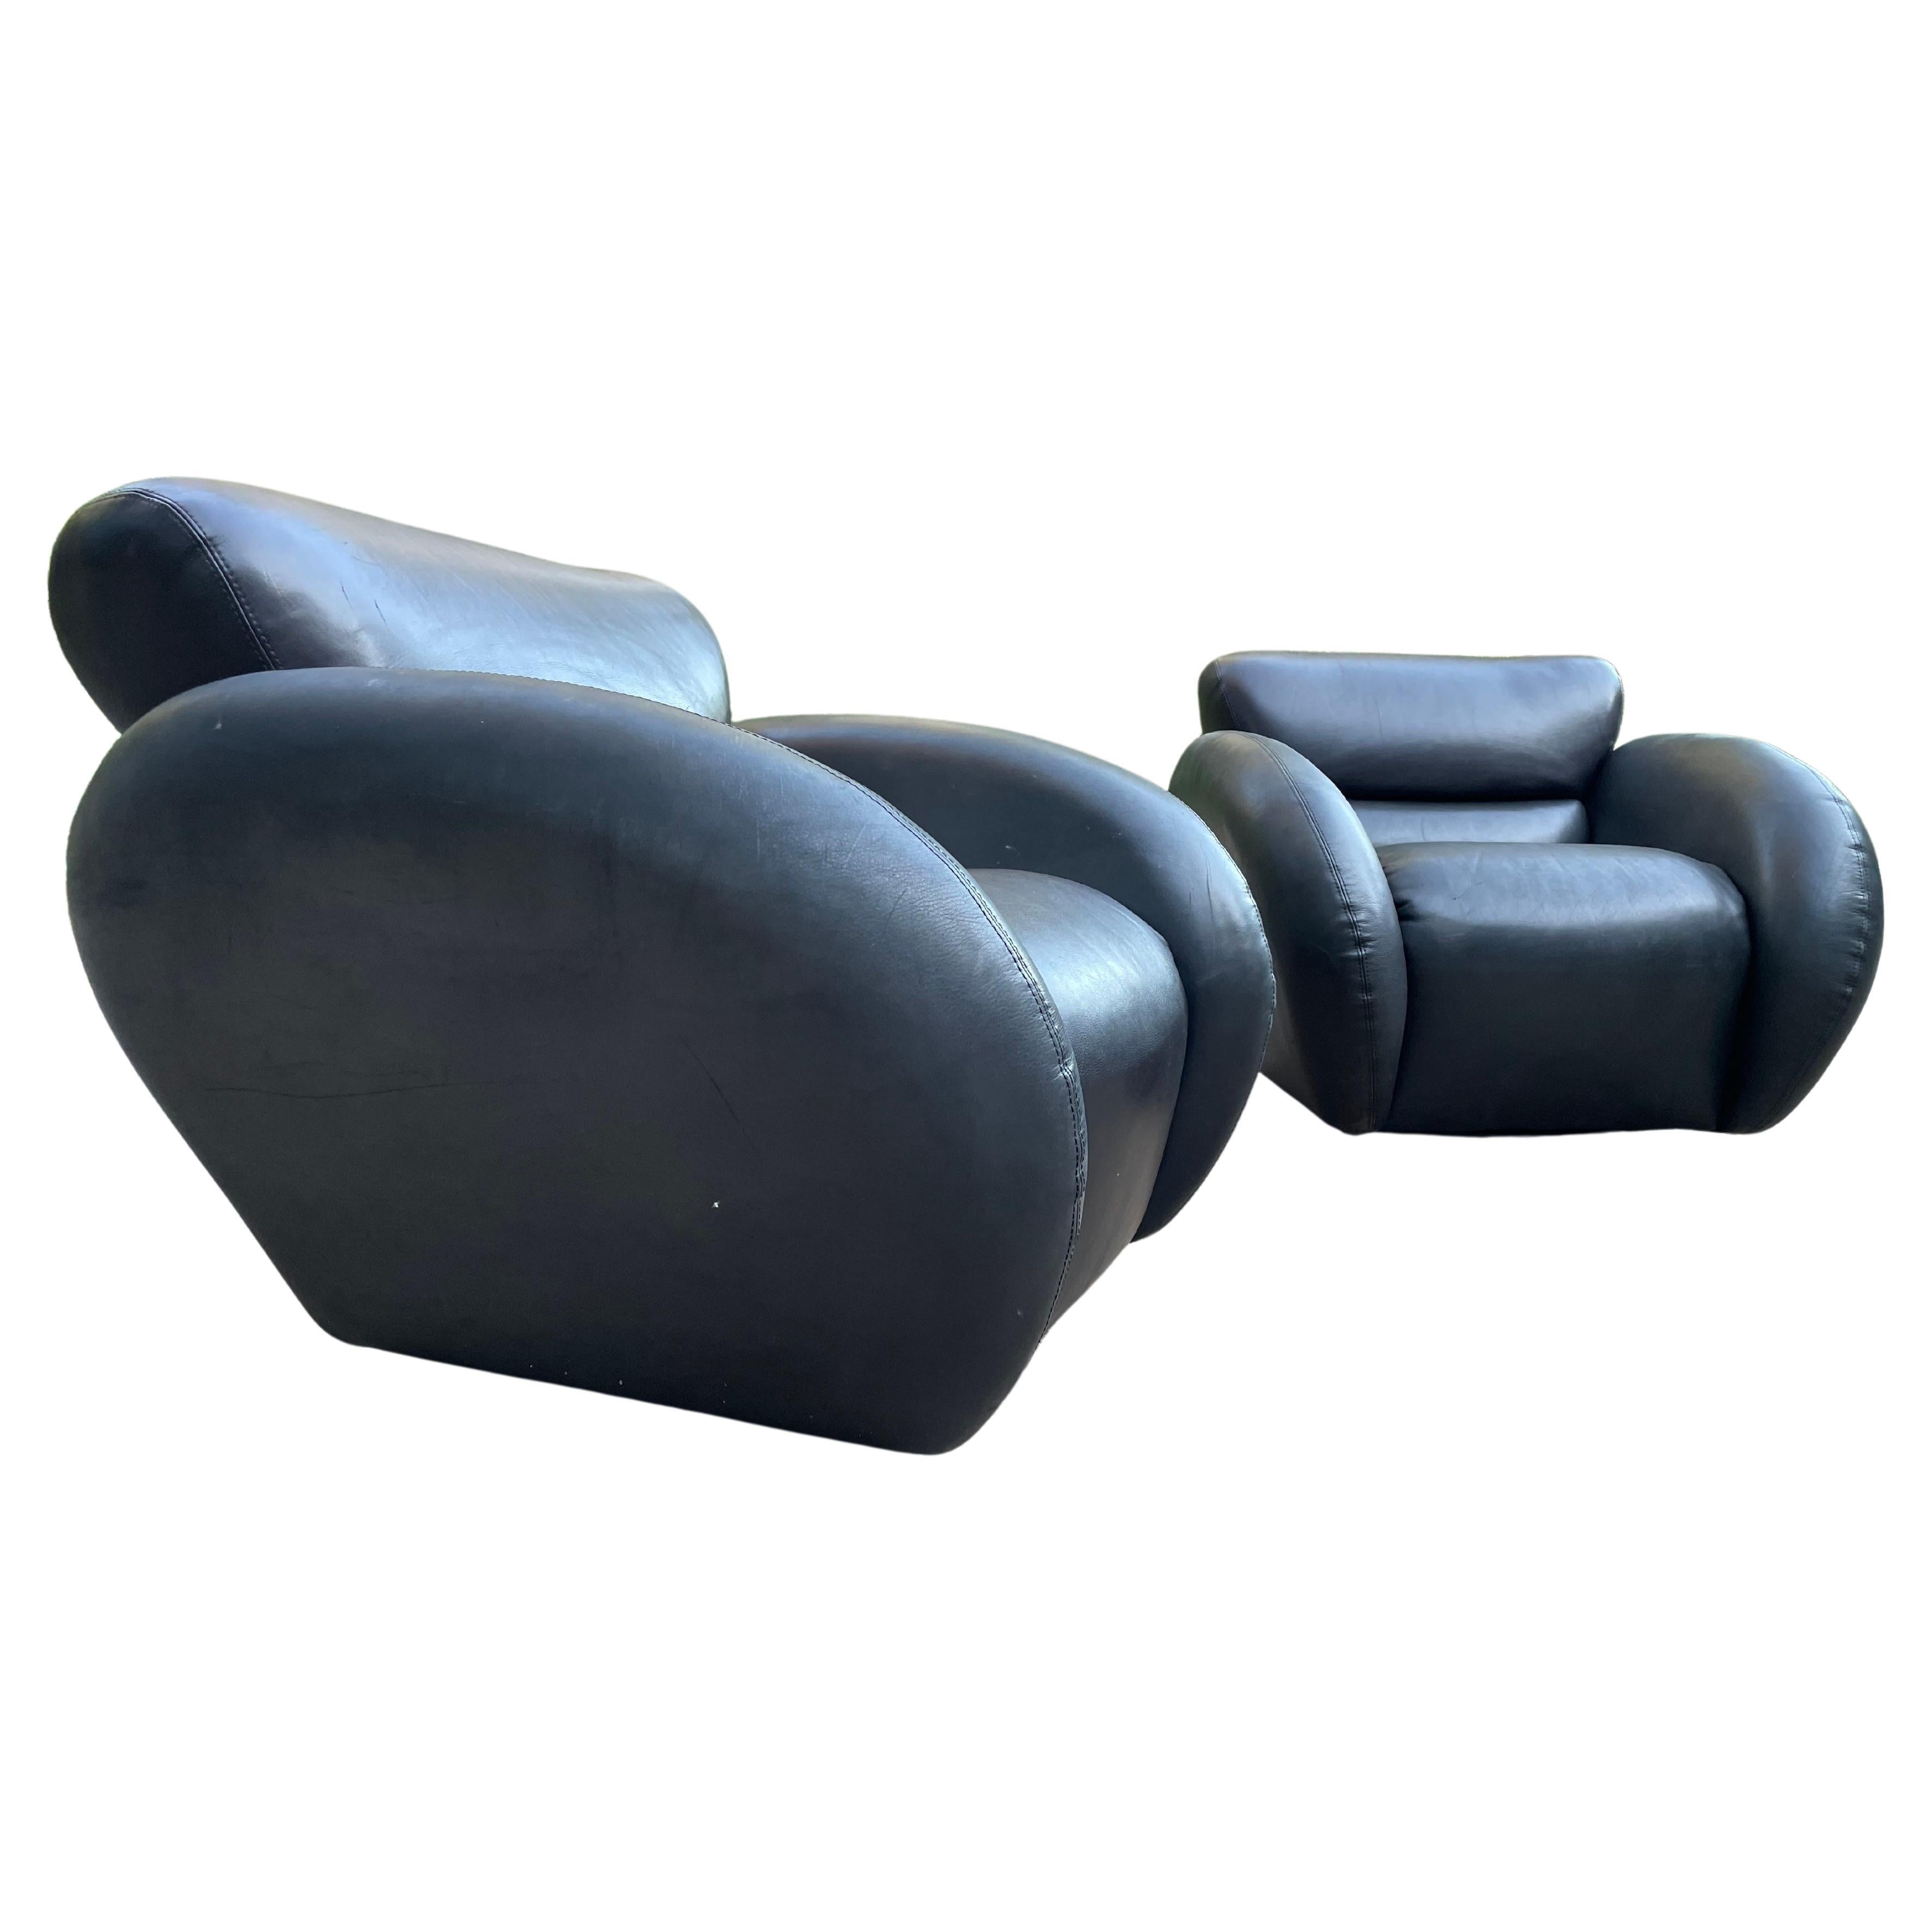 Large Scale Leather Swivel Lounge Chairs for Directional In Good Condition For Sale In Los Angeles, CA